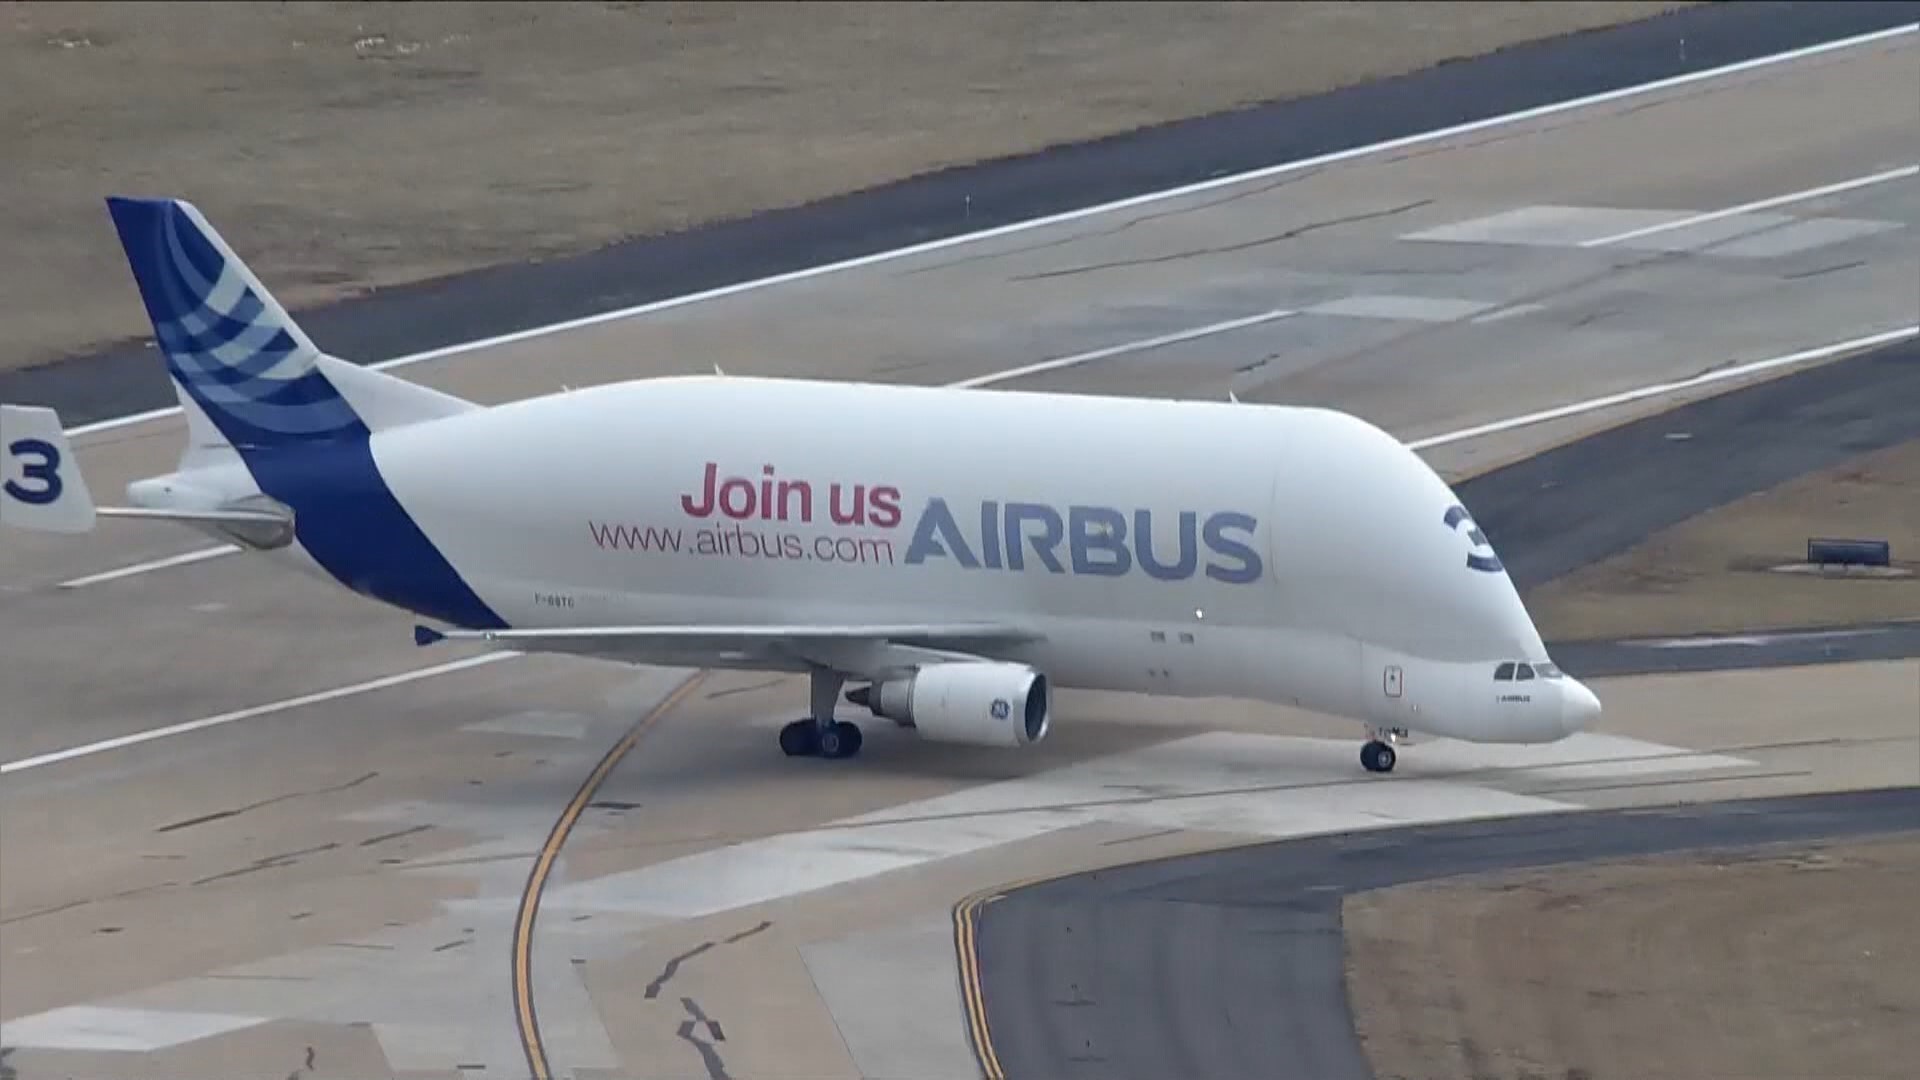 The Airbus took off from St. John's and landed at Dulles International Airport in Virginia Thursday Morning.